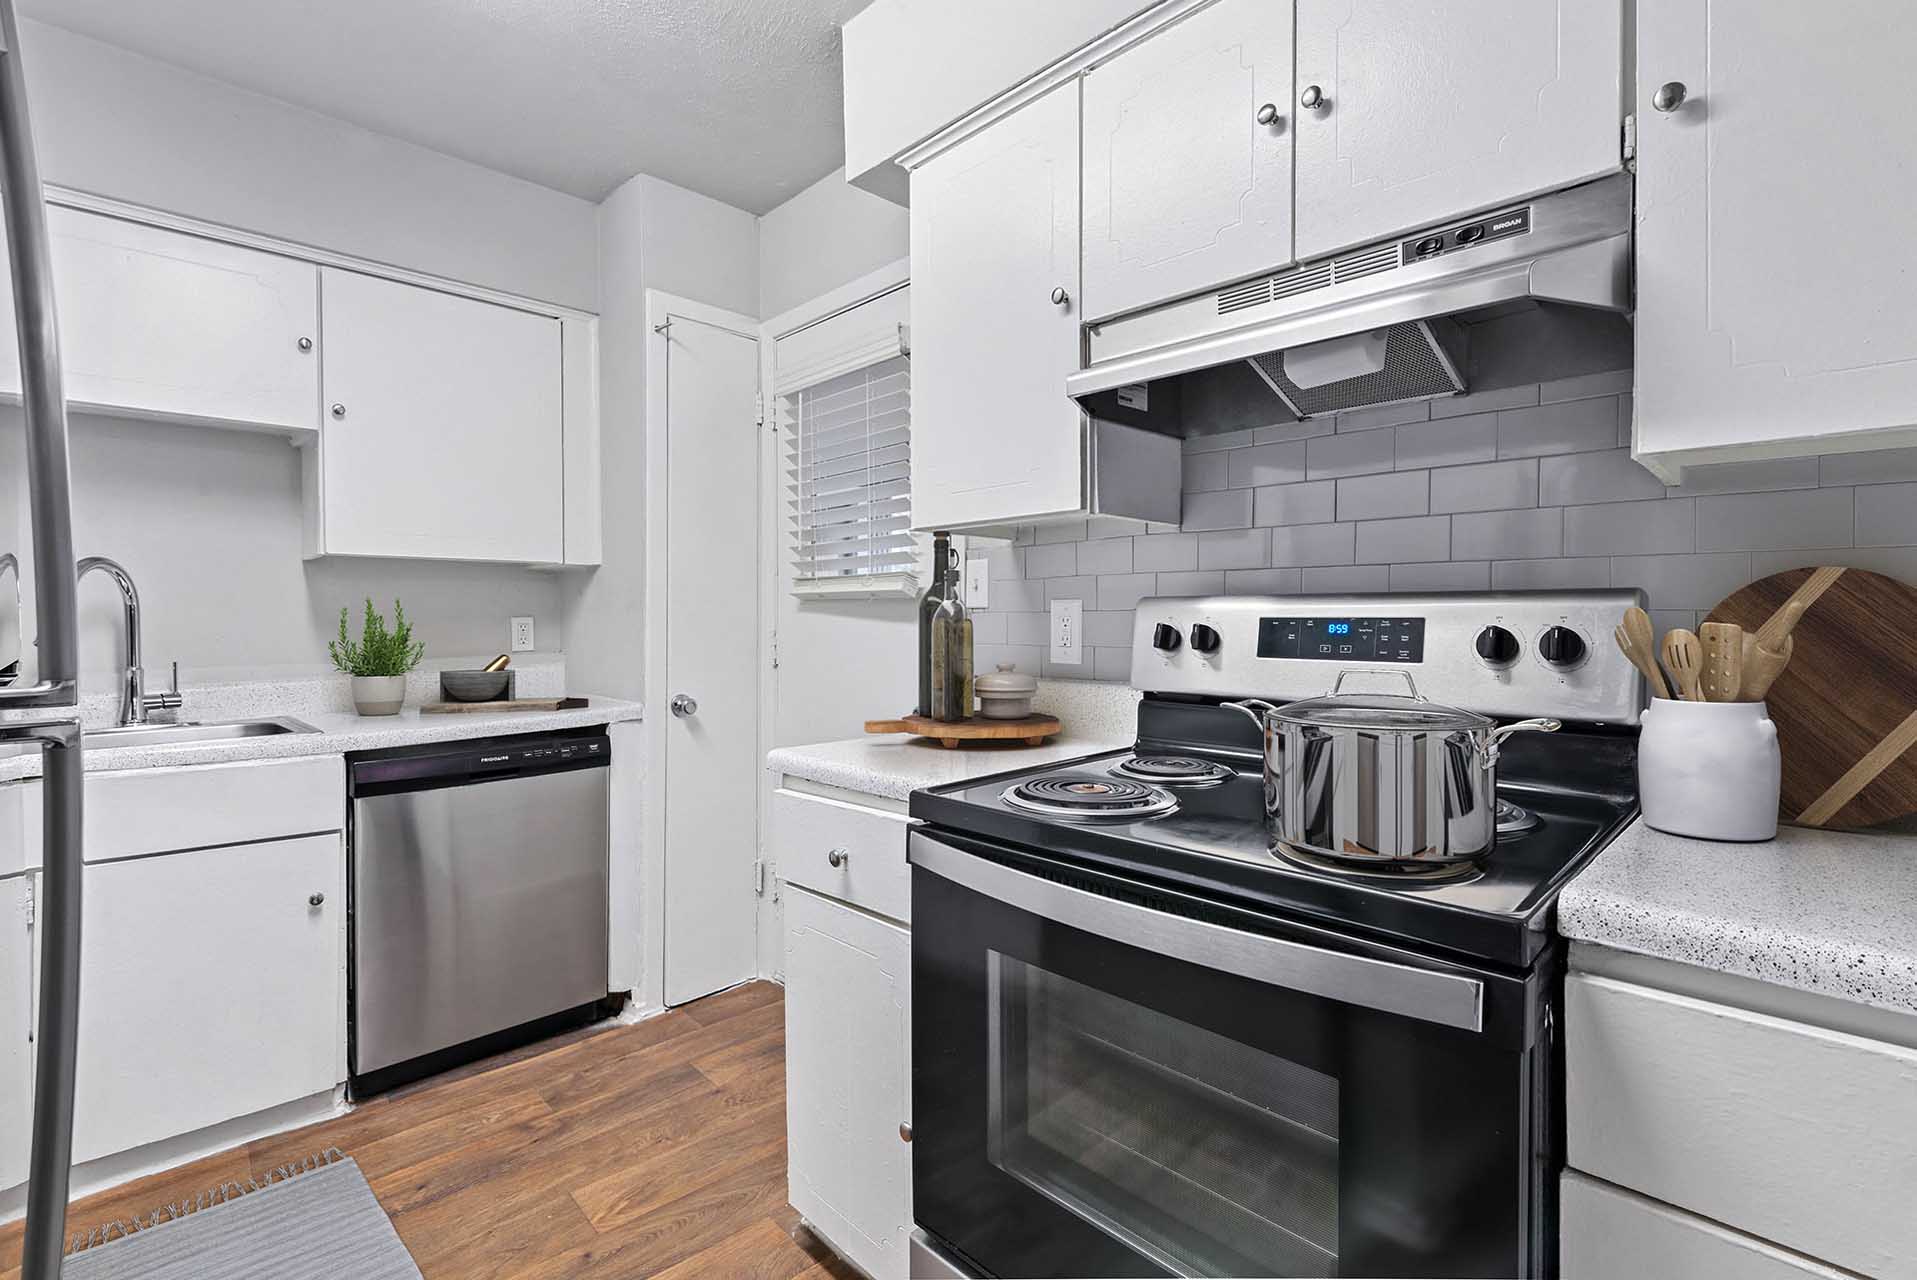 Renovated kitchen with stainless steel appliances and white cabinets